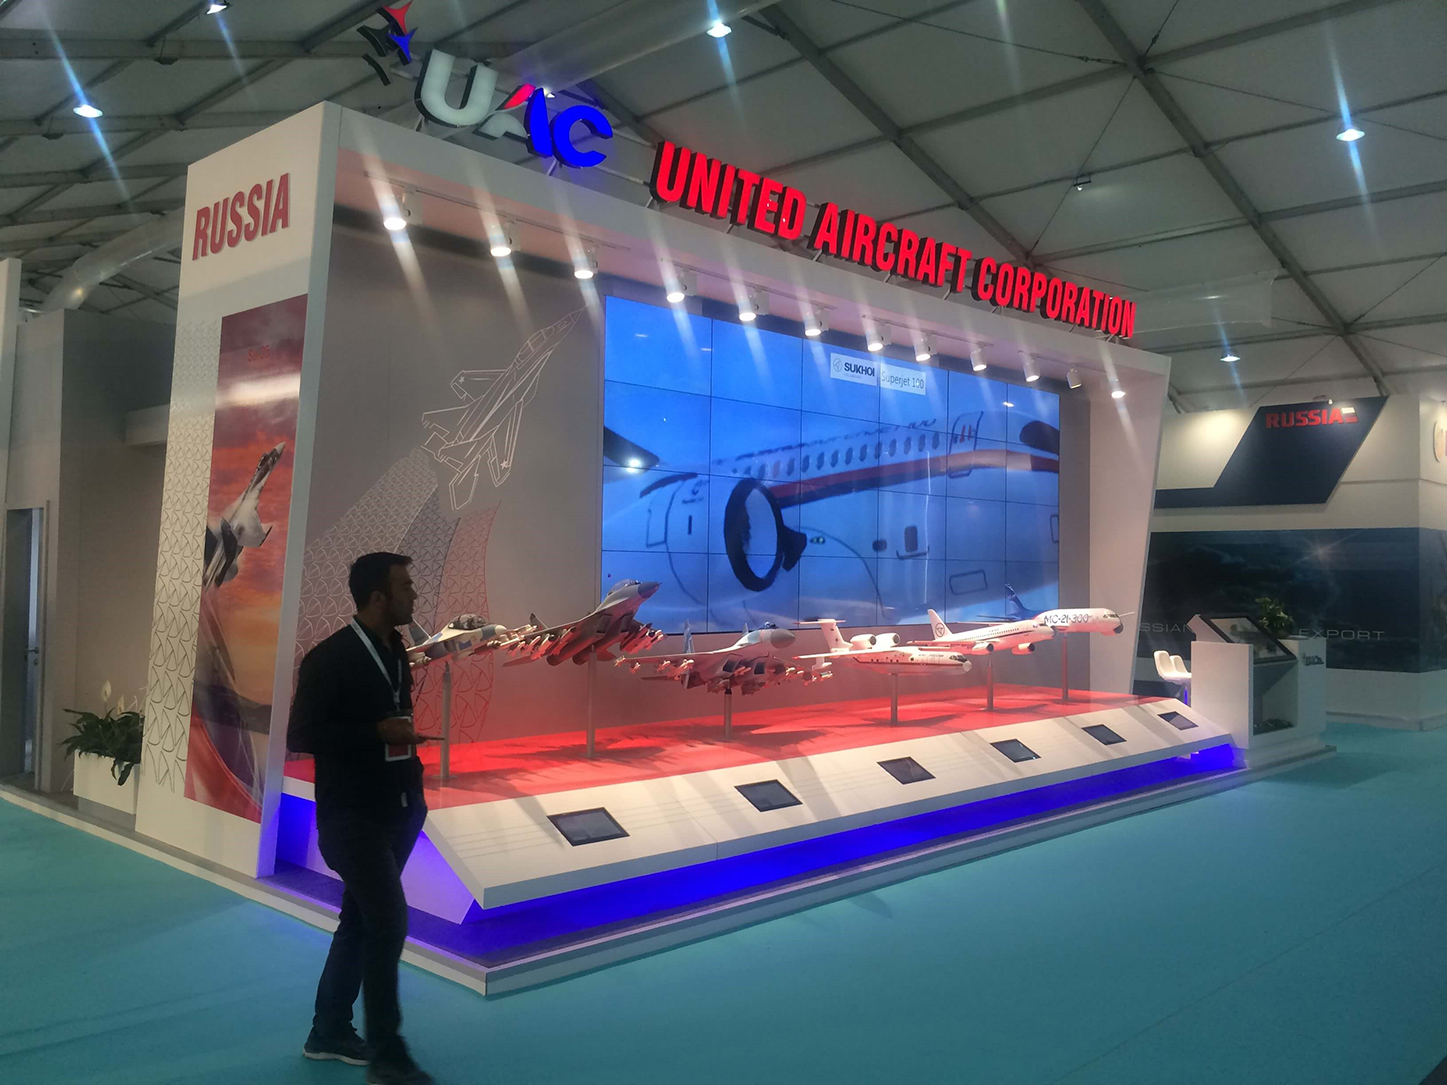 United Aircraft Corporation to participate in Eurasia Airshow 2018